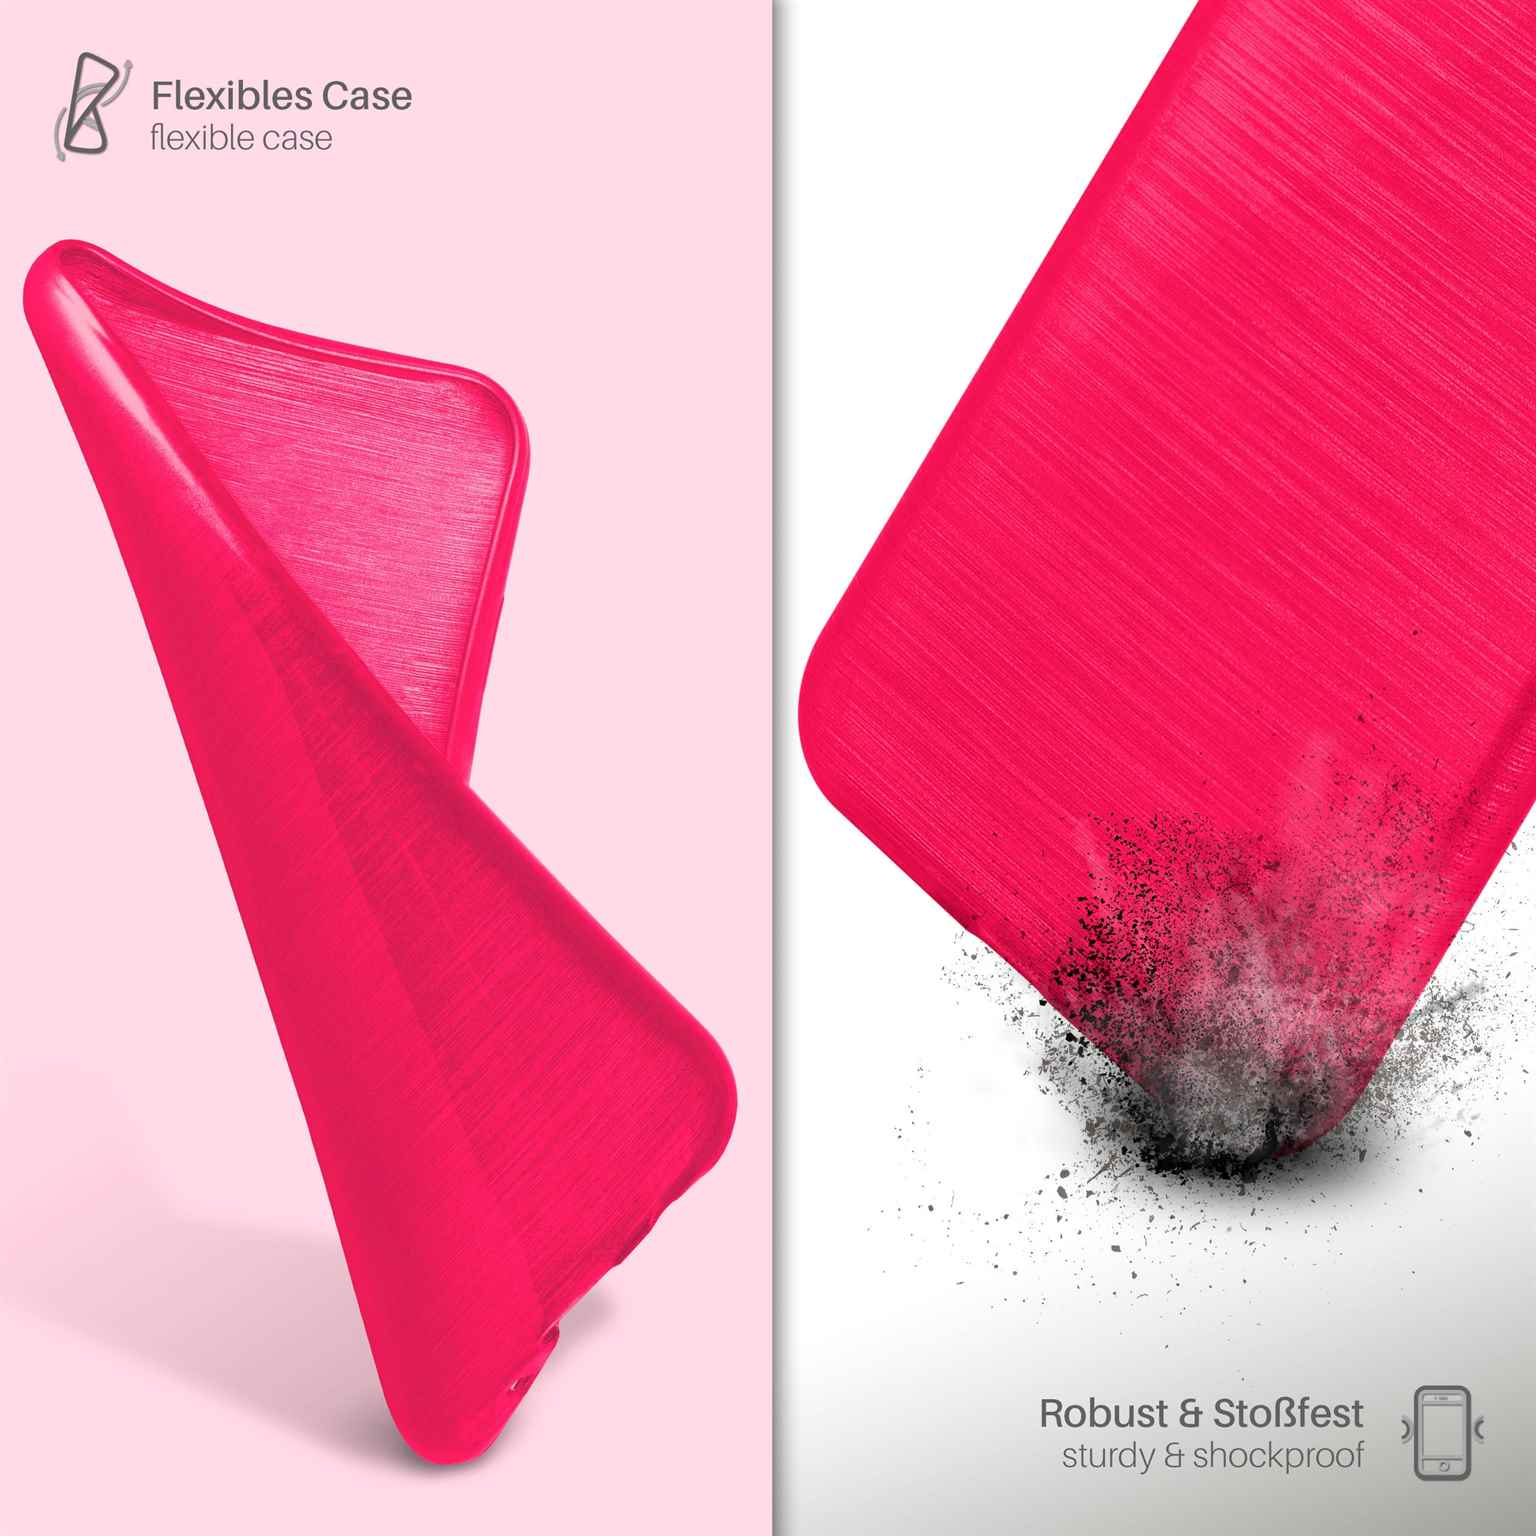 MOEX Brushed Case, Backcover, HTC, M7, Magenta-Pink One